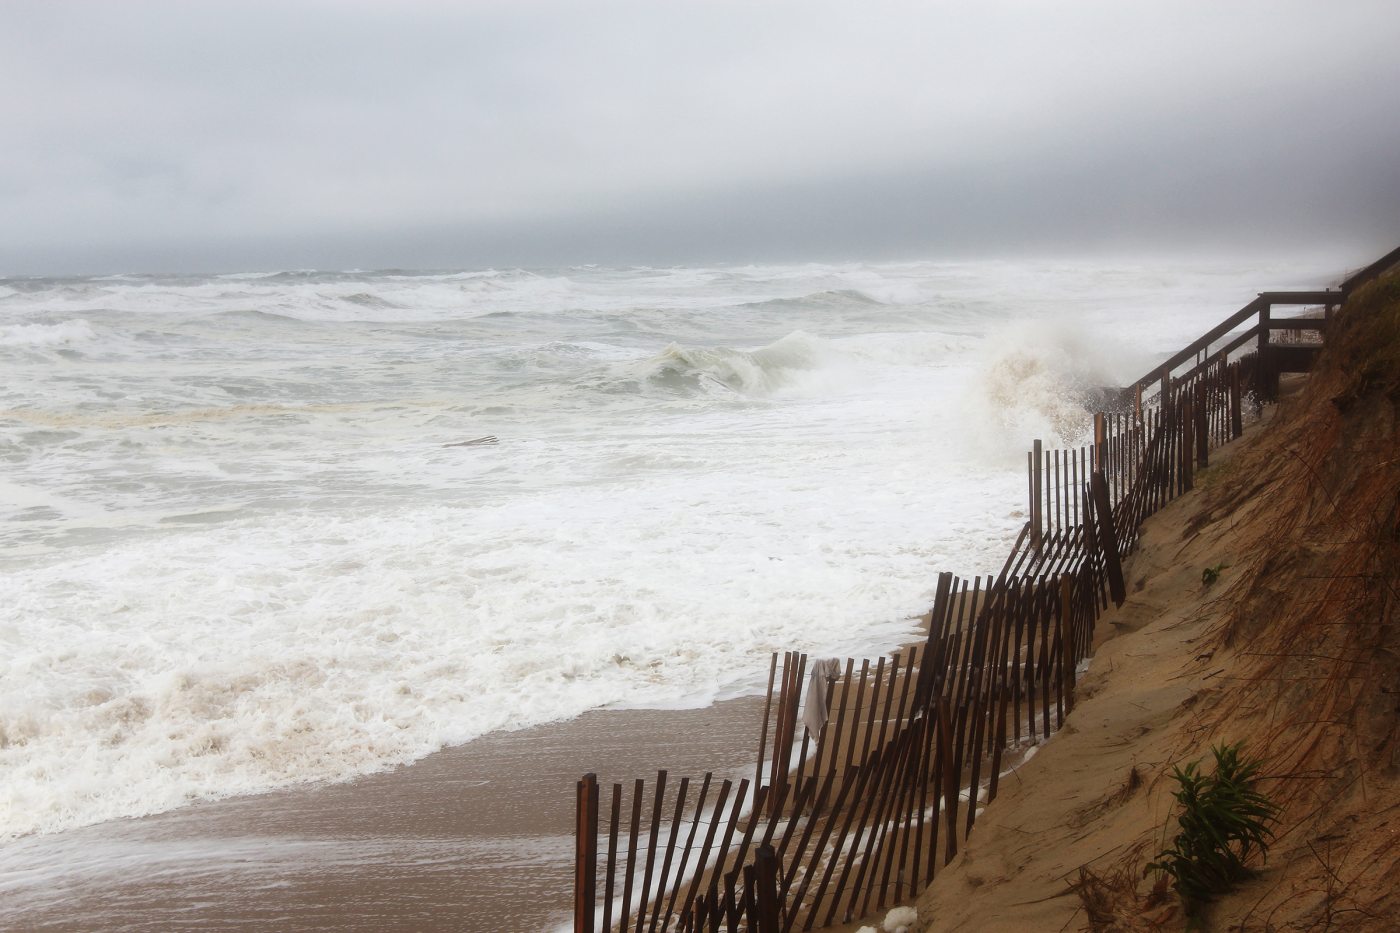 Waves hit the beach during the hurricanes.